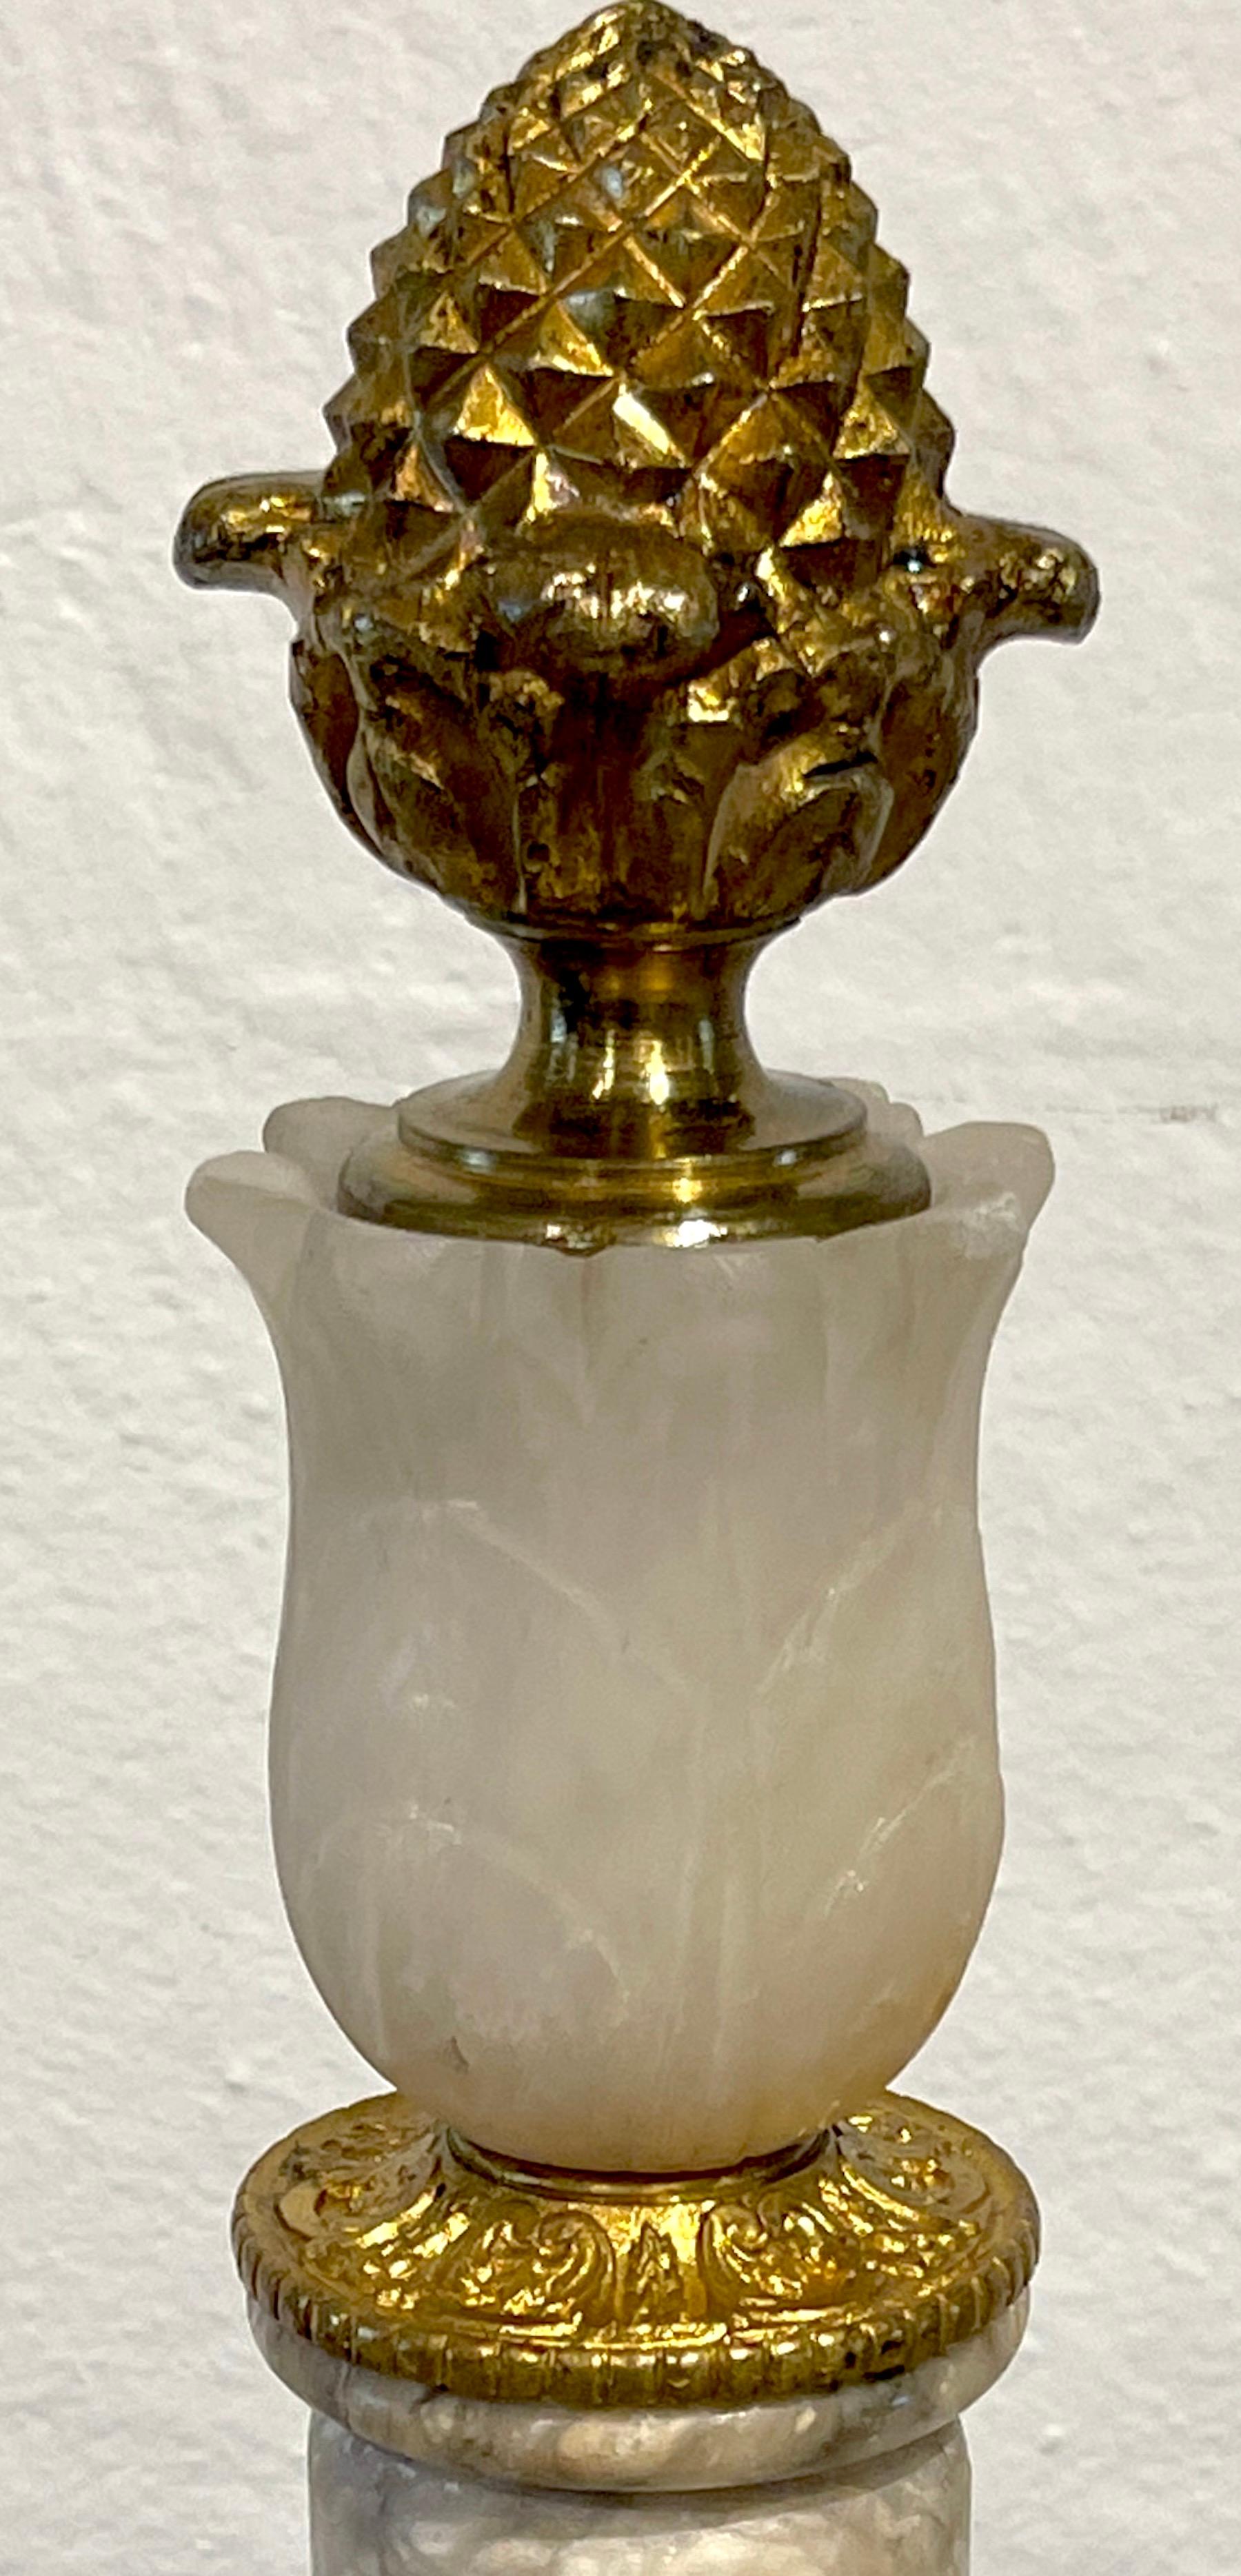 Antique French Neoclassical Marble & Ormolu Pastry Centerpiece / Tazza  In Good Condition For Sale In West Palm Beach, FL